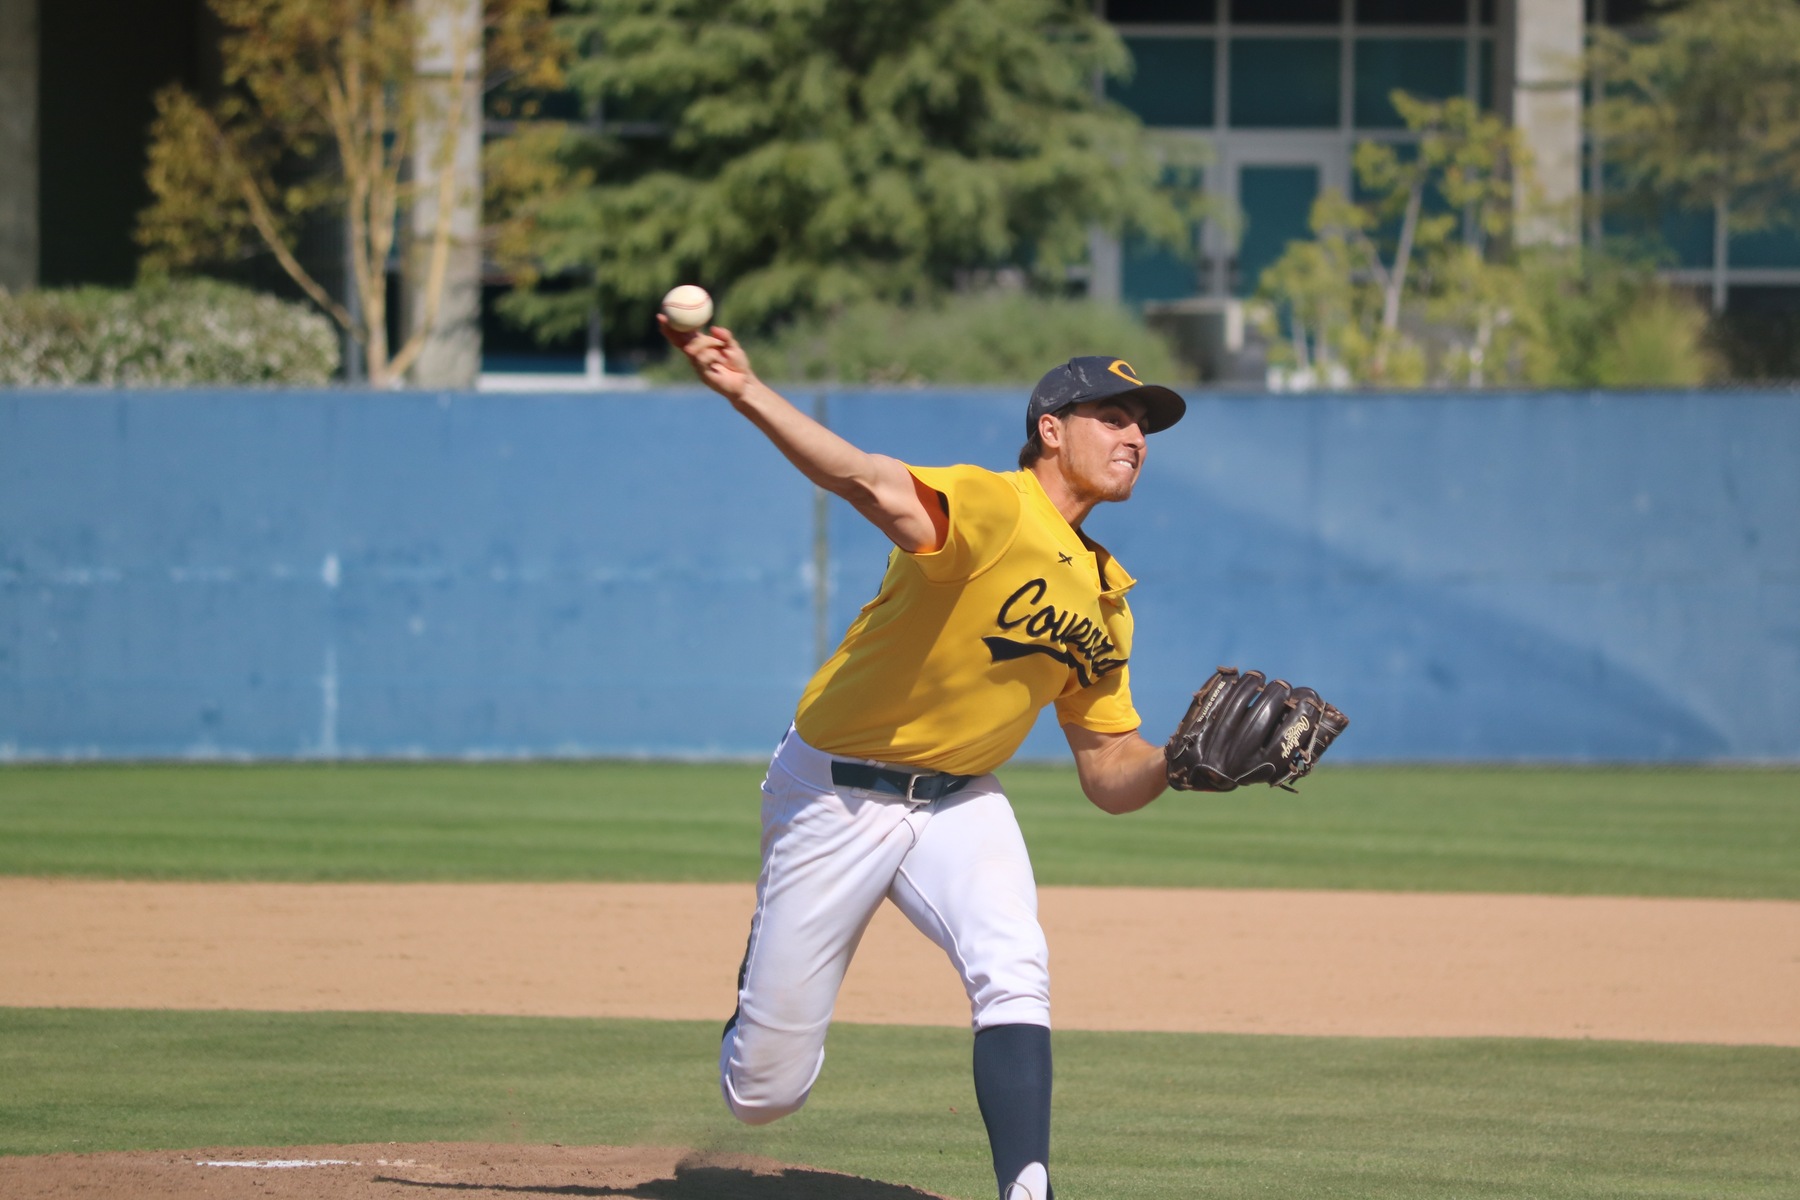 Former Cougar Justin Dehn Named to CCCAA Scholar Athlete Honor Roll